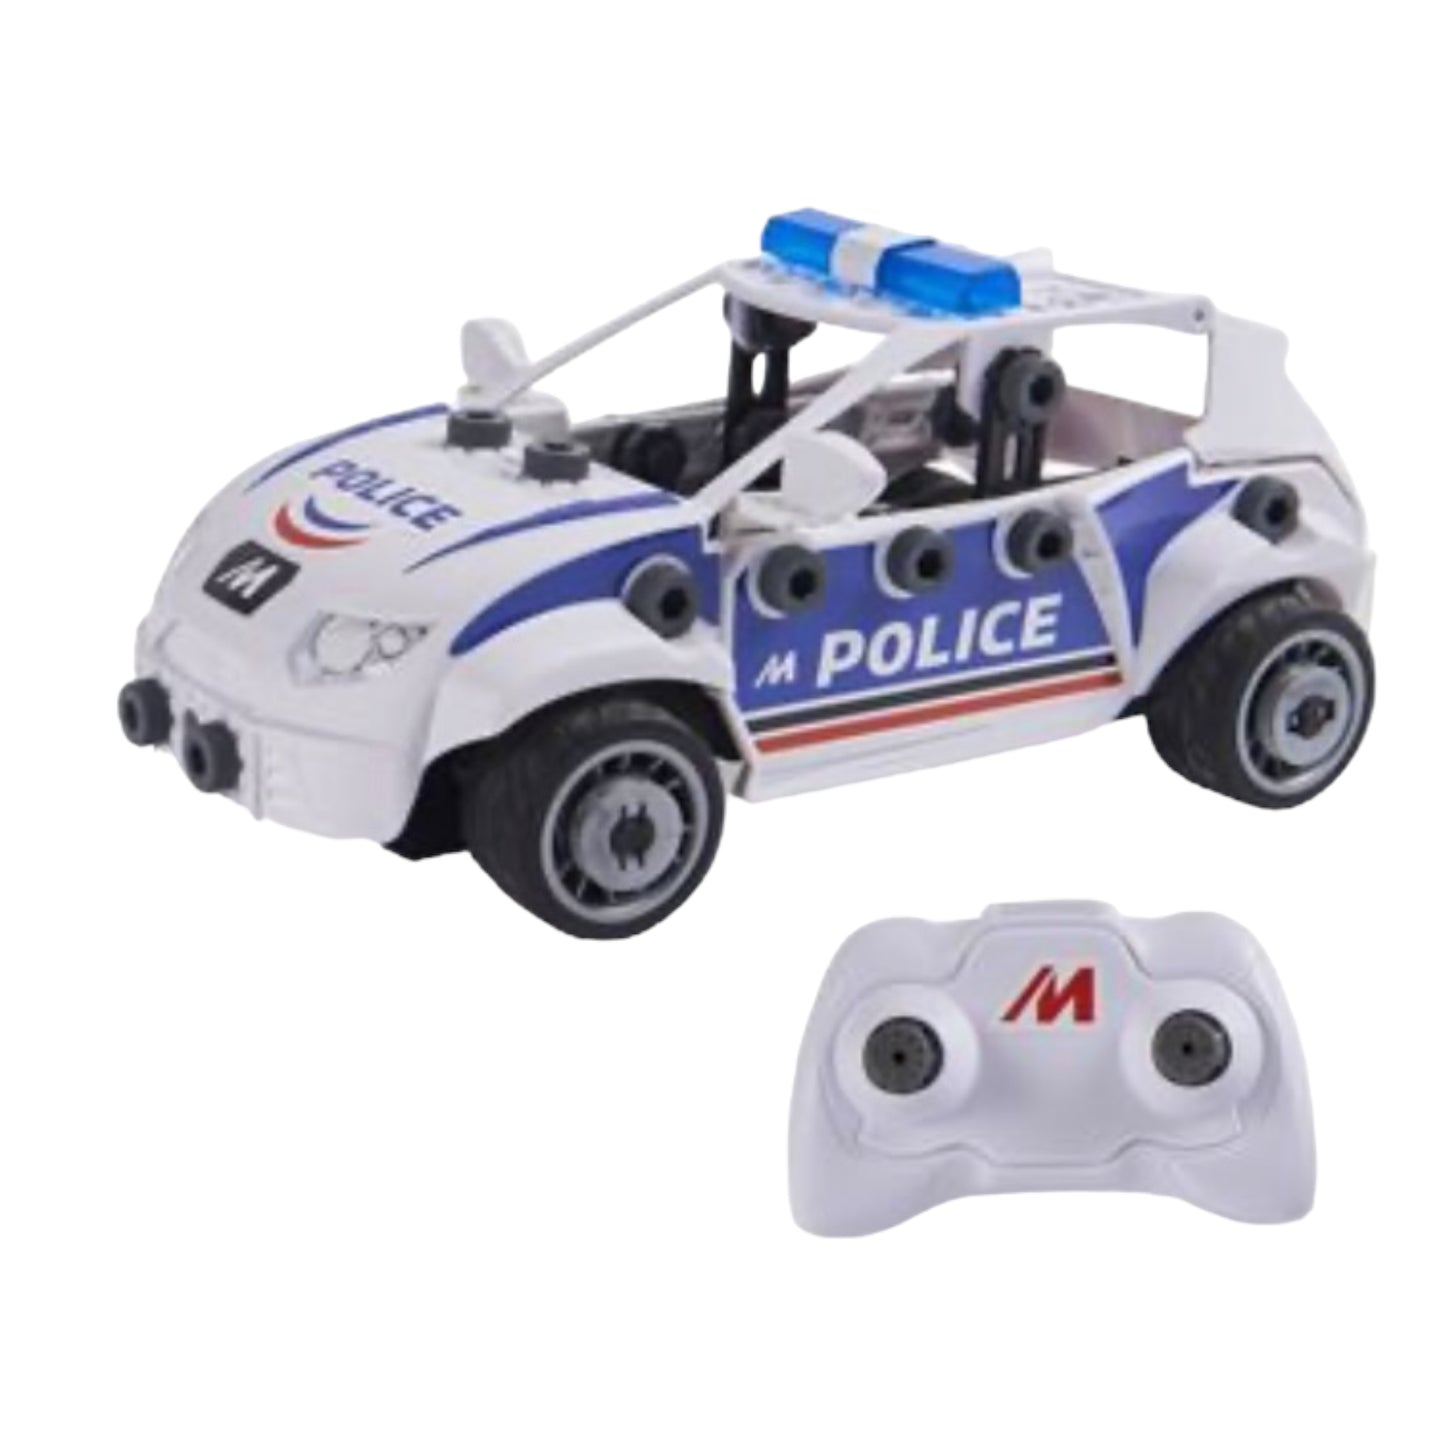 Meccano Junior, RC Police Car with Working Trunk and Real Tools, Toy Model Building Kit, STEM Toys